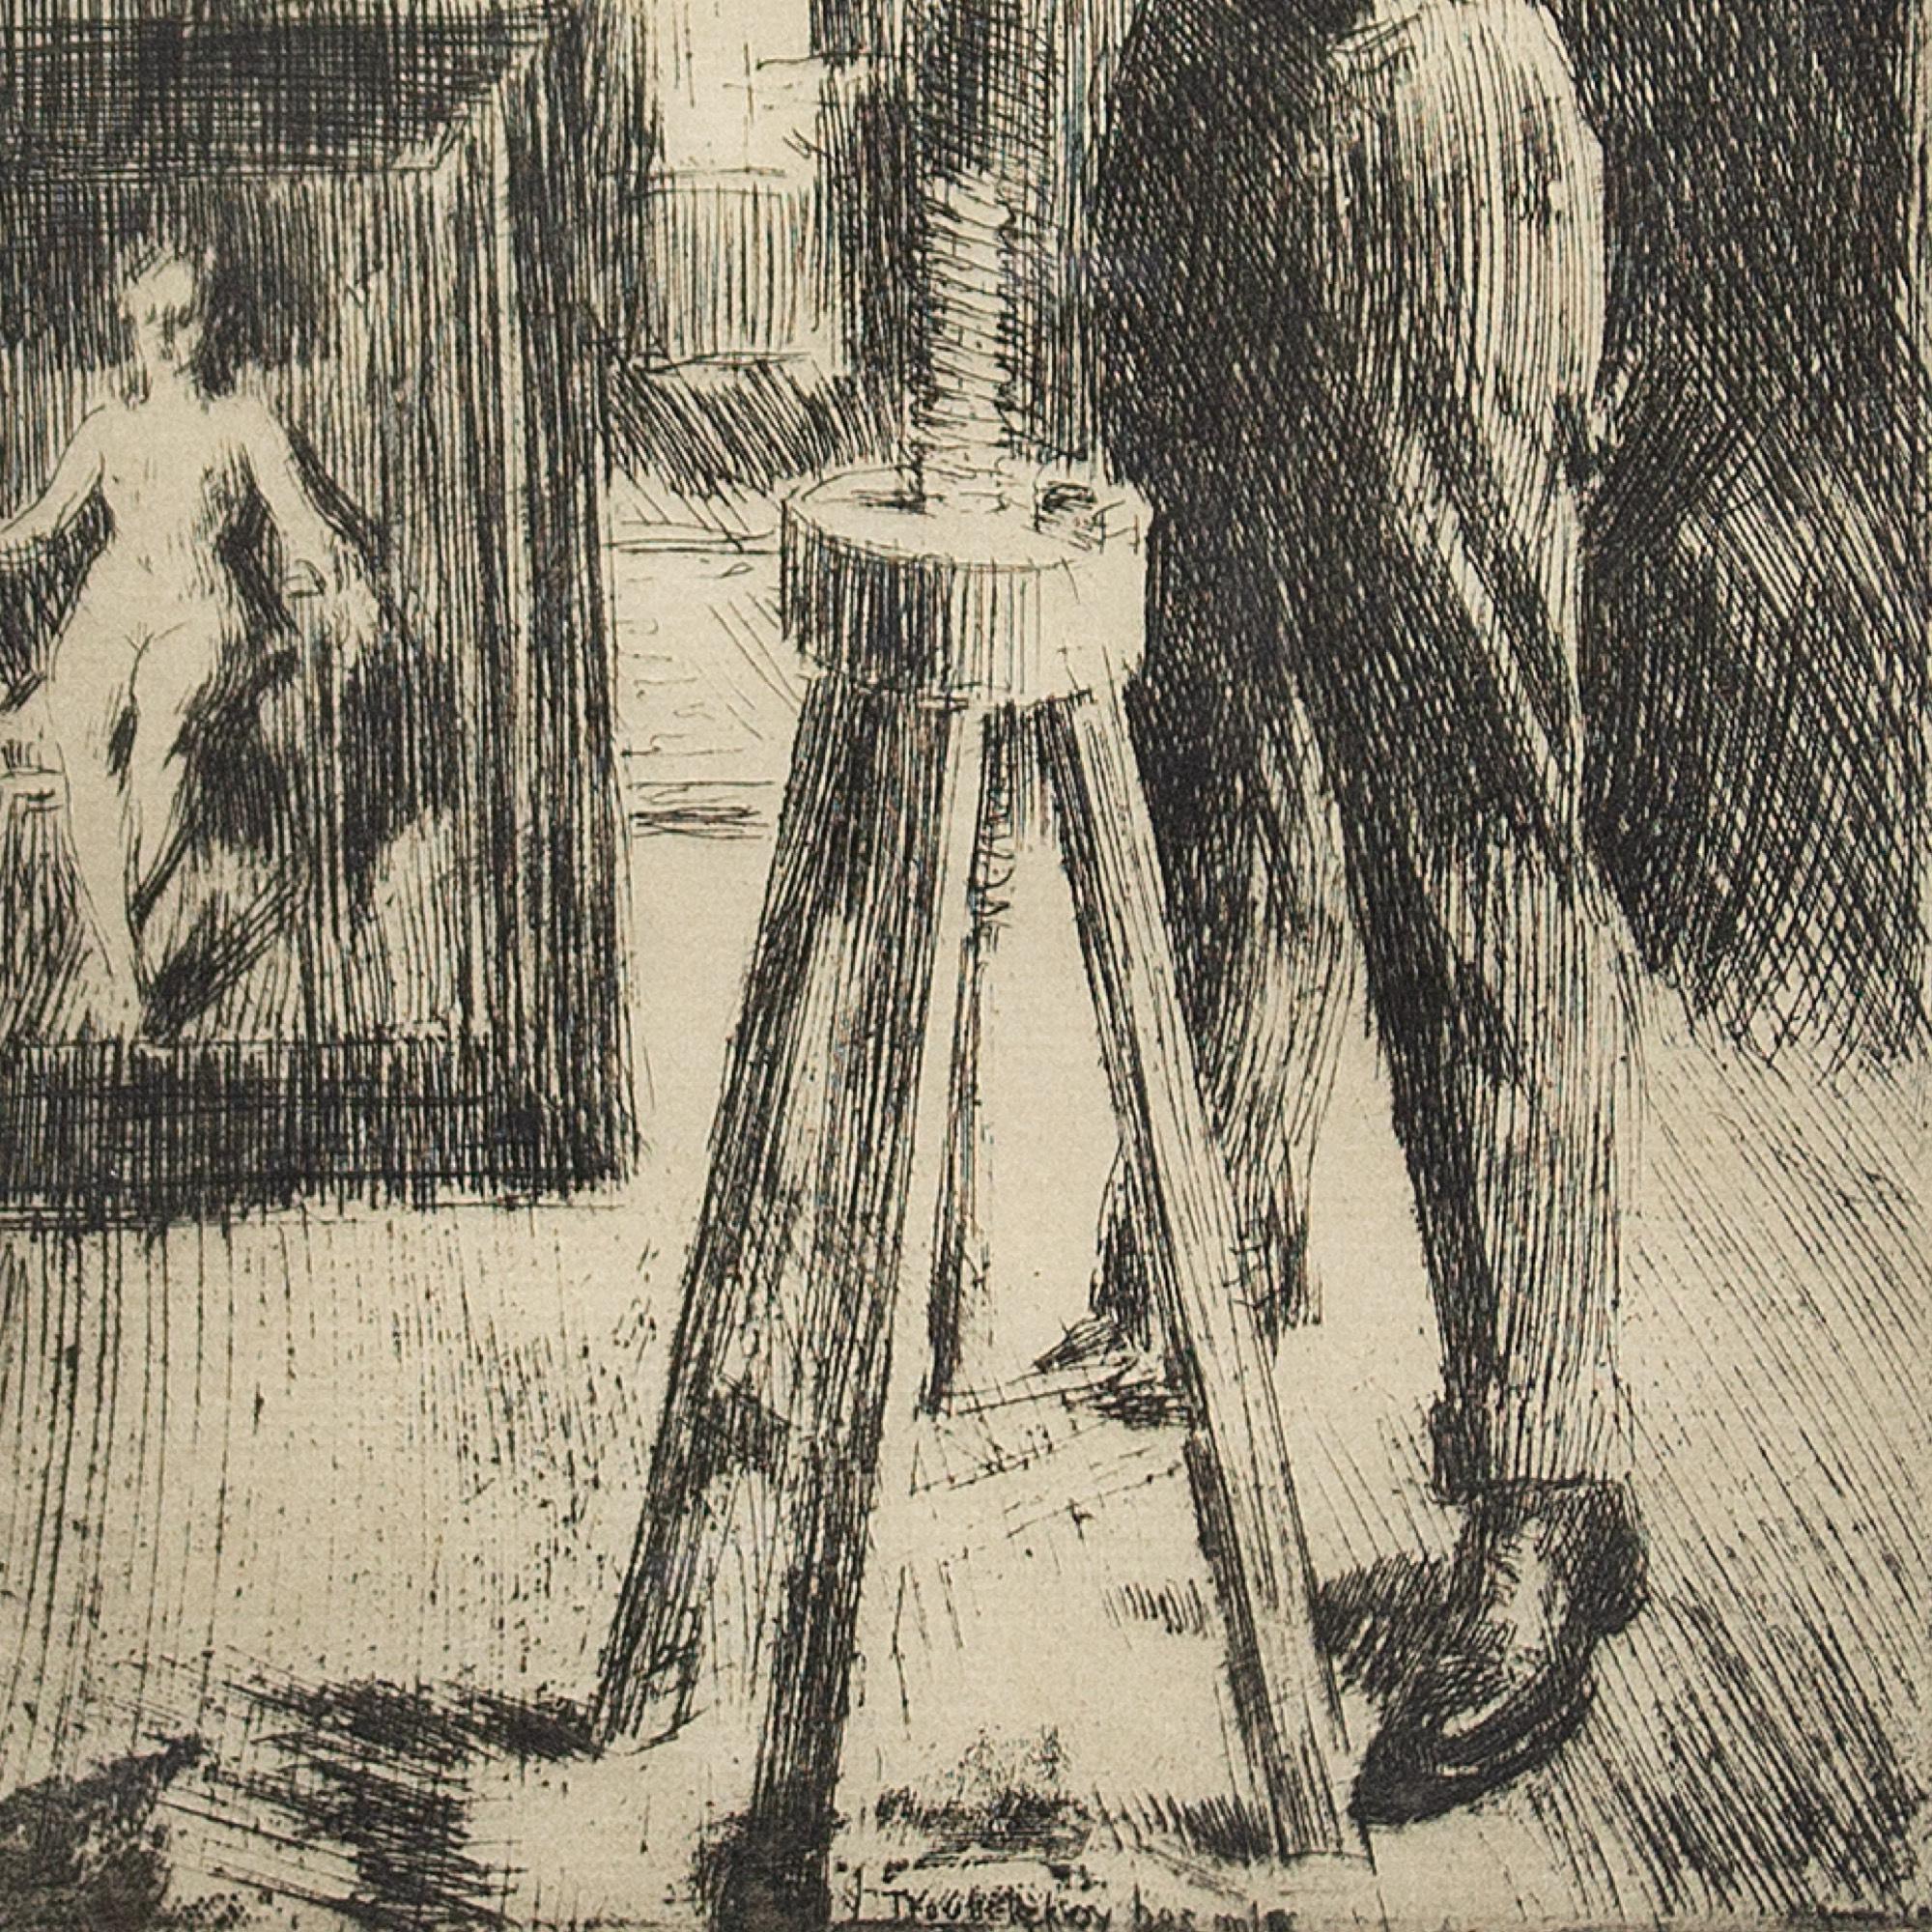 This spirited etching of Prince Paolo Petrovich Troubetzkoy (1866-1938) by Swedish artist Anders Zorn (1860-1920) depicts the sculptor working on a bust of Zorn himself. Both artists are immersed in their work, each respectful of the other, a mutual